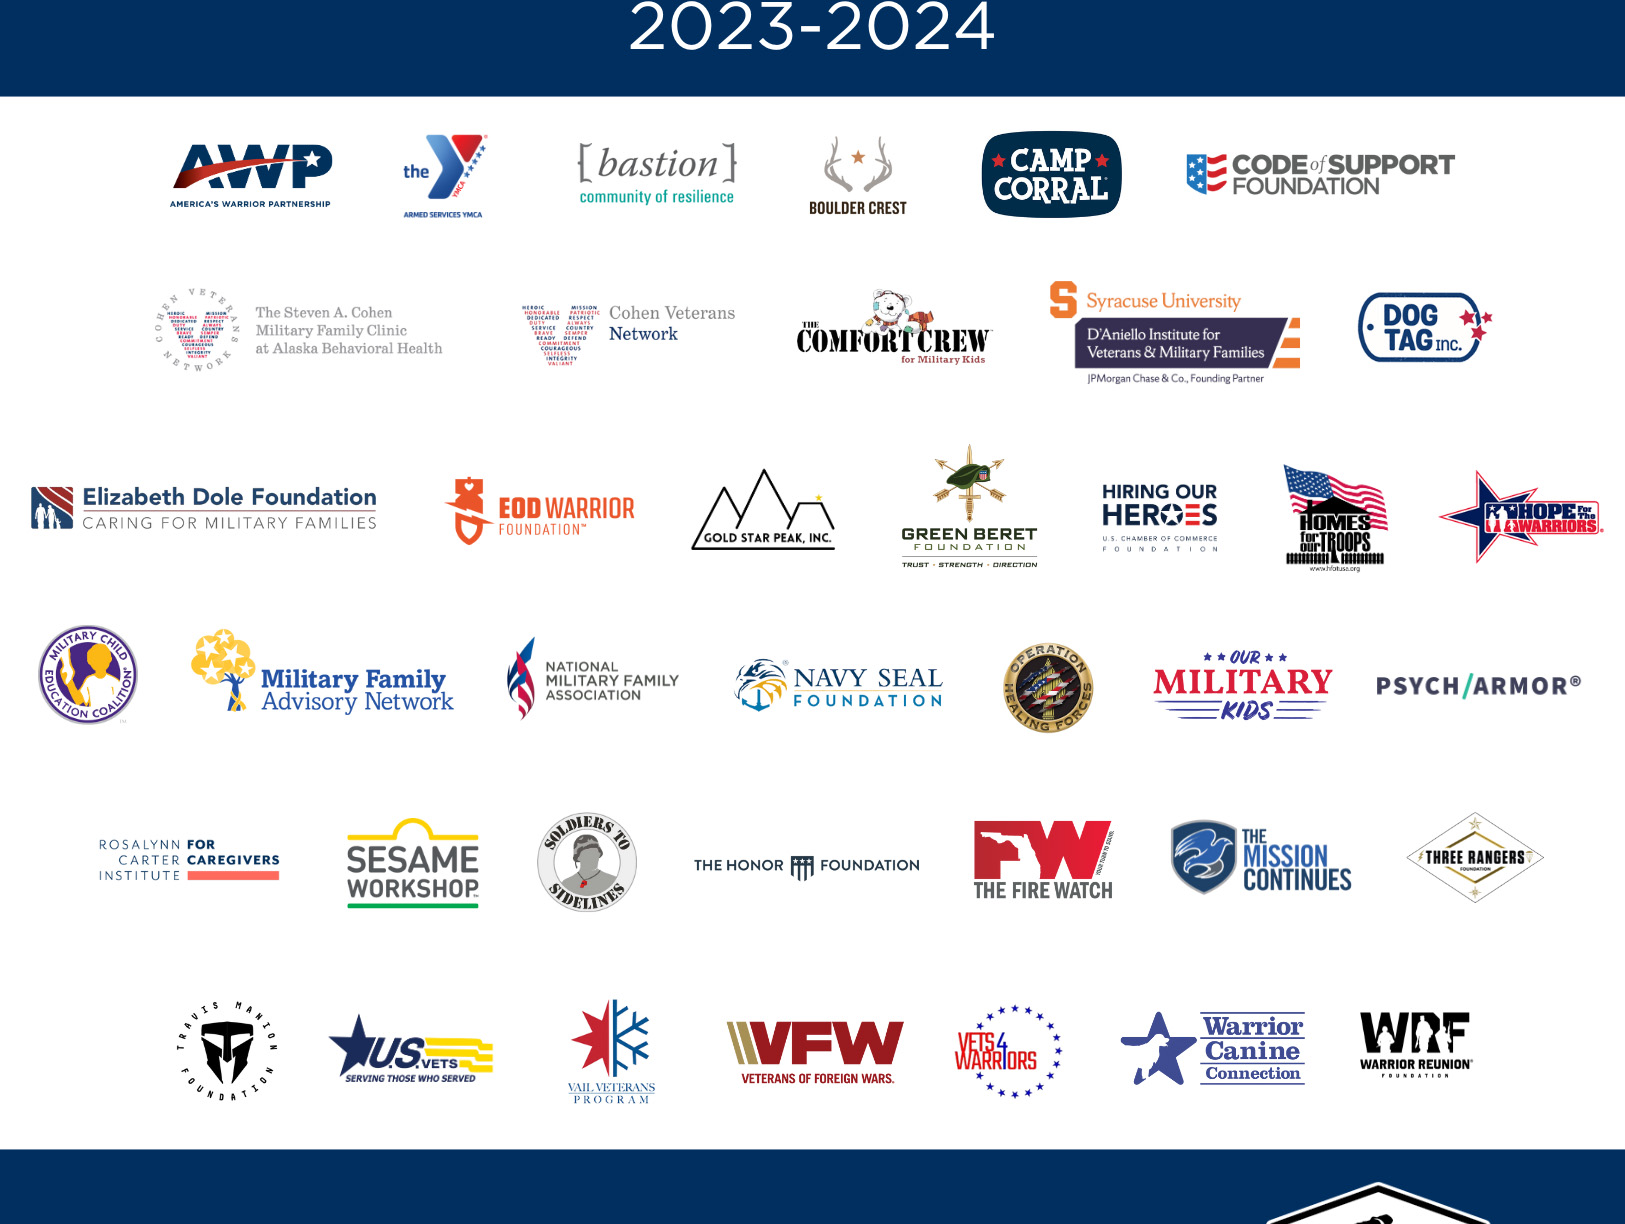 WWP’s community partners augment the organization’s programs and services and deepen WWP’s impact on warriors, families, and caregivers. The organization invests in programs that address veterans’ overall quality of life, reduce suicide risks, and support high-need populations.